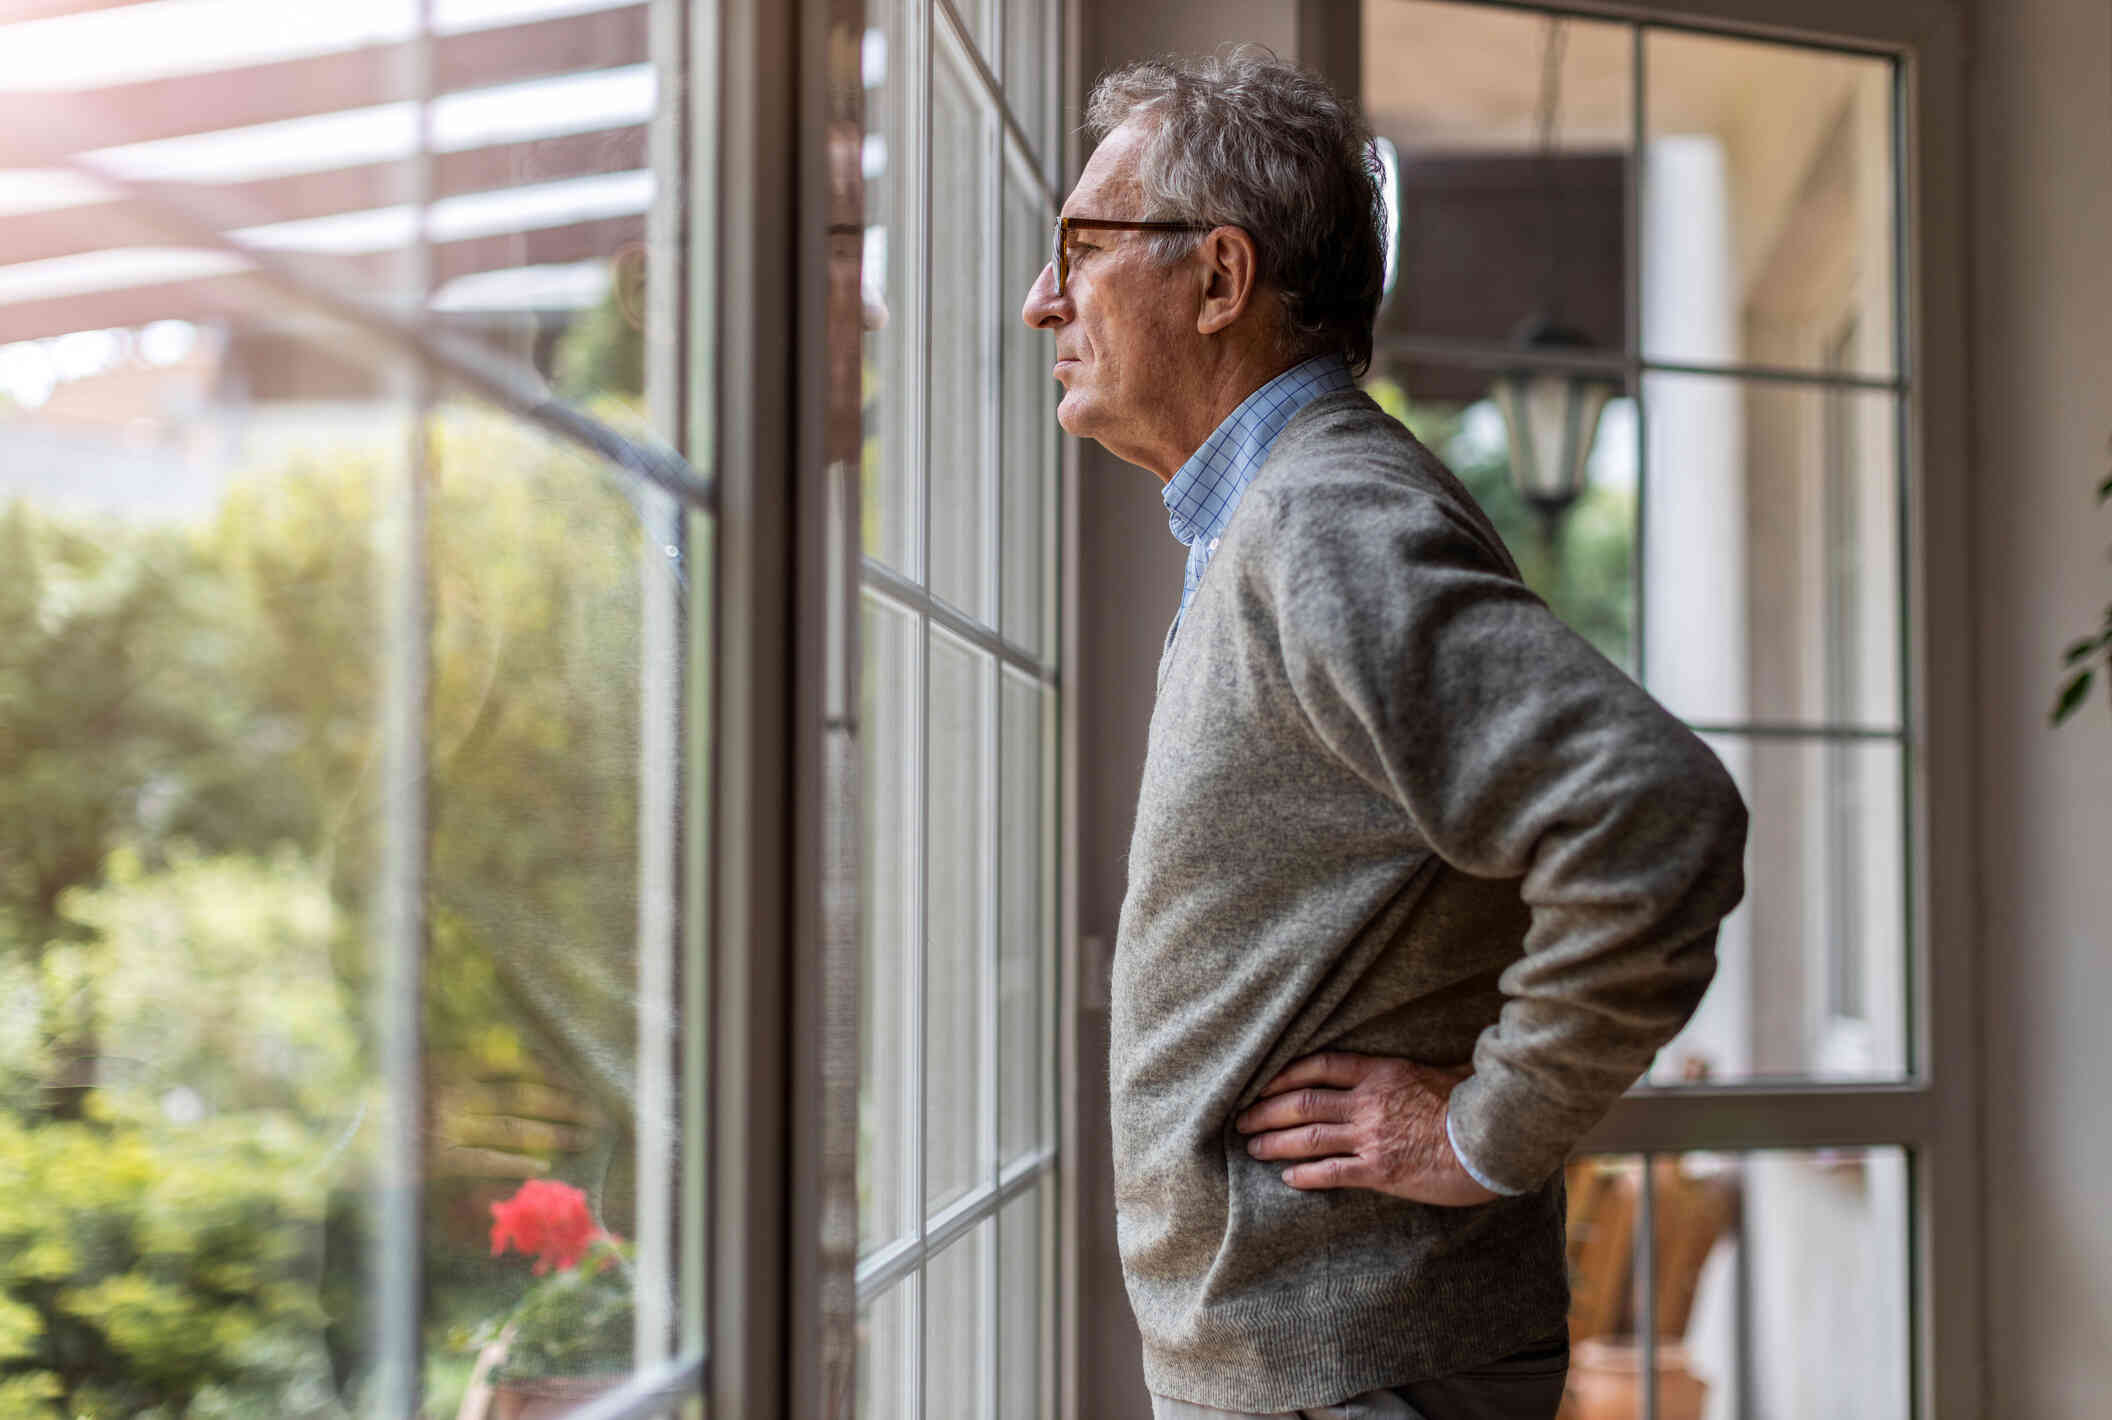 An elderly man with glasses stands infront of a window in his home and places his hands on his hips while gazing out of the window with a sad expression.